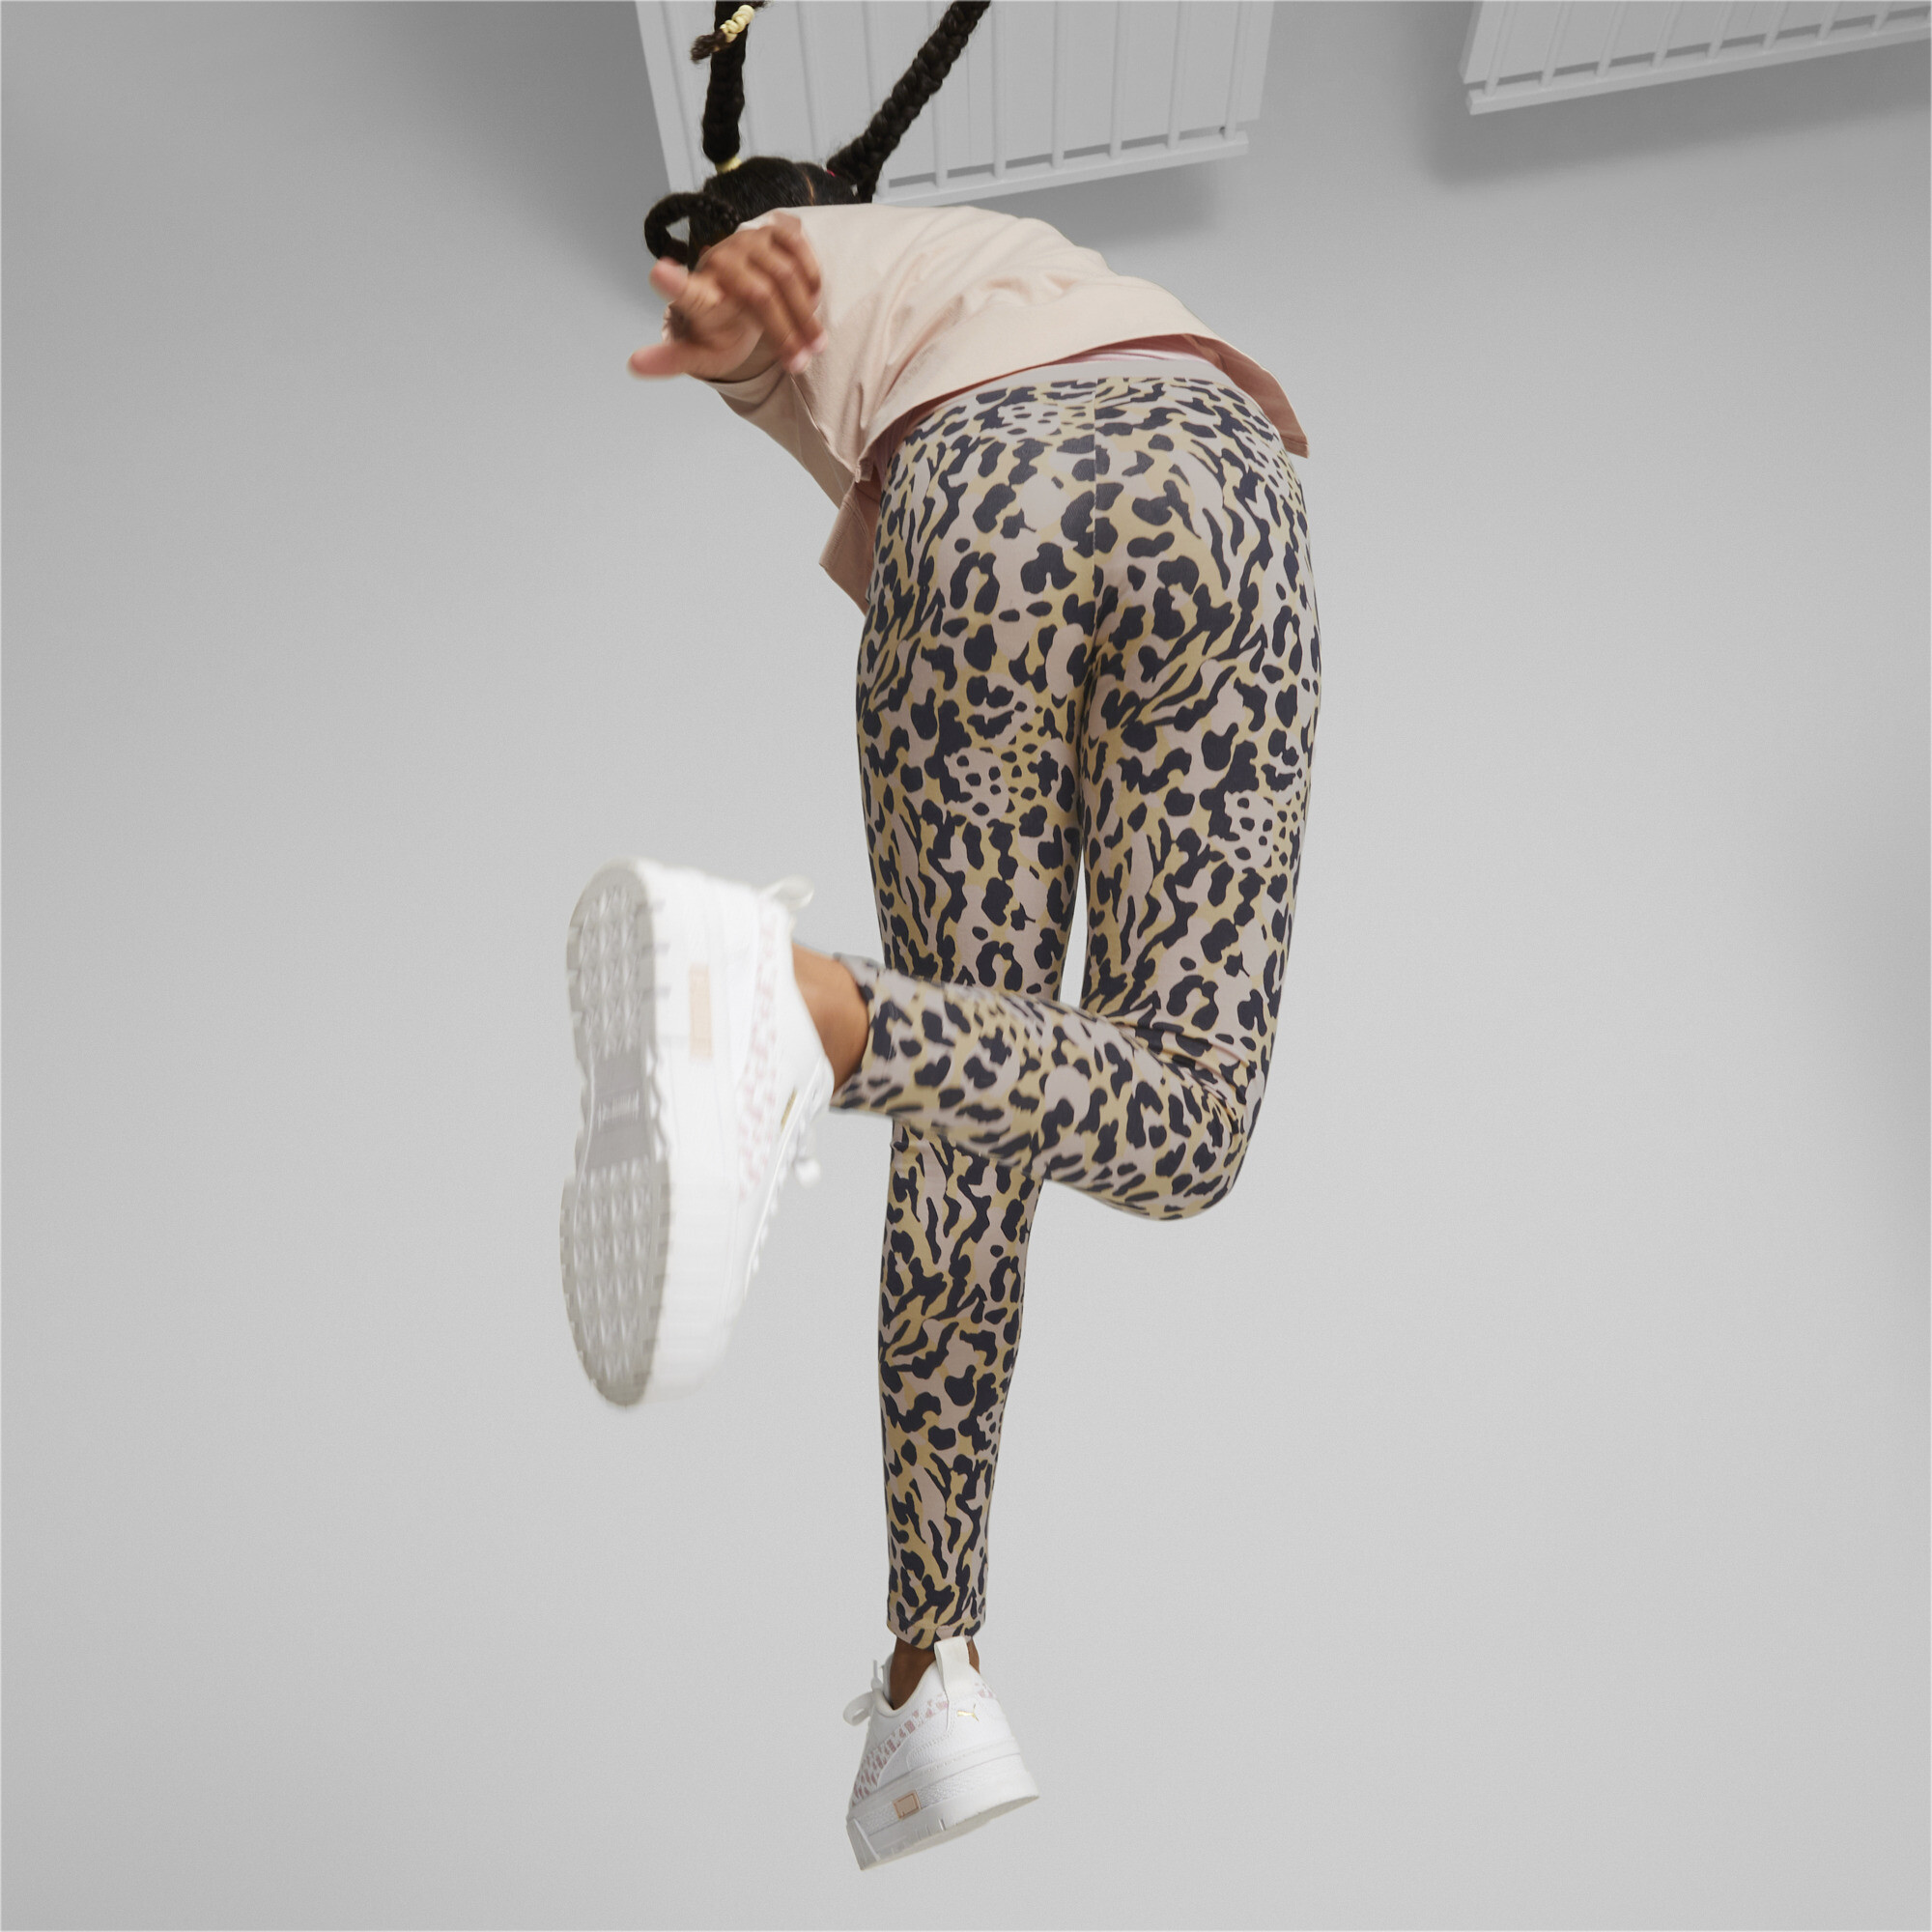 PUMA Alpha Printed Leggings In Pink, Size 7-8 Youth